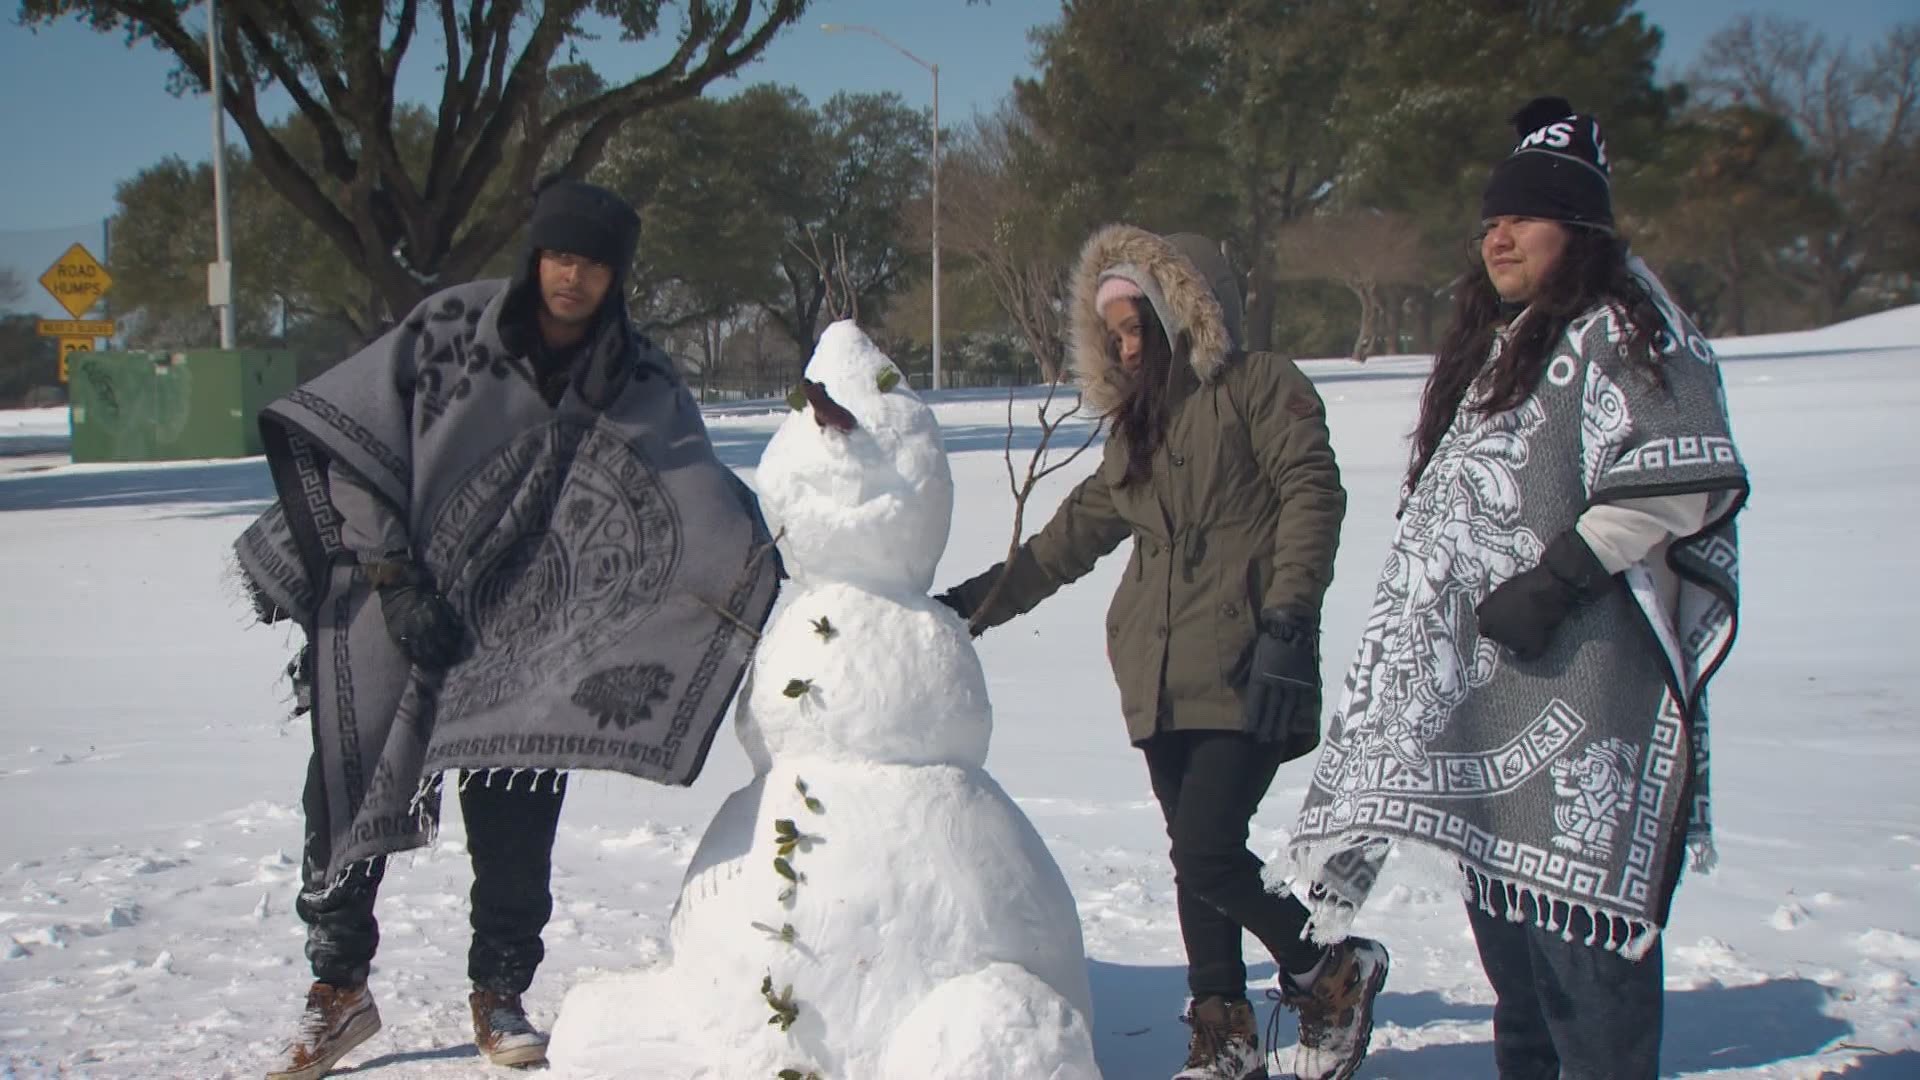 With freezing temperatures and rolling blackouts hitting the region, some residents are beating the stress by taking time to enjoy the snow.